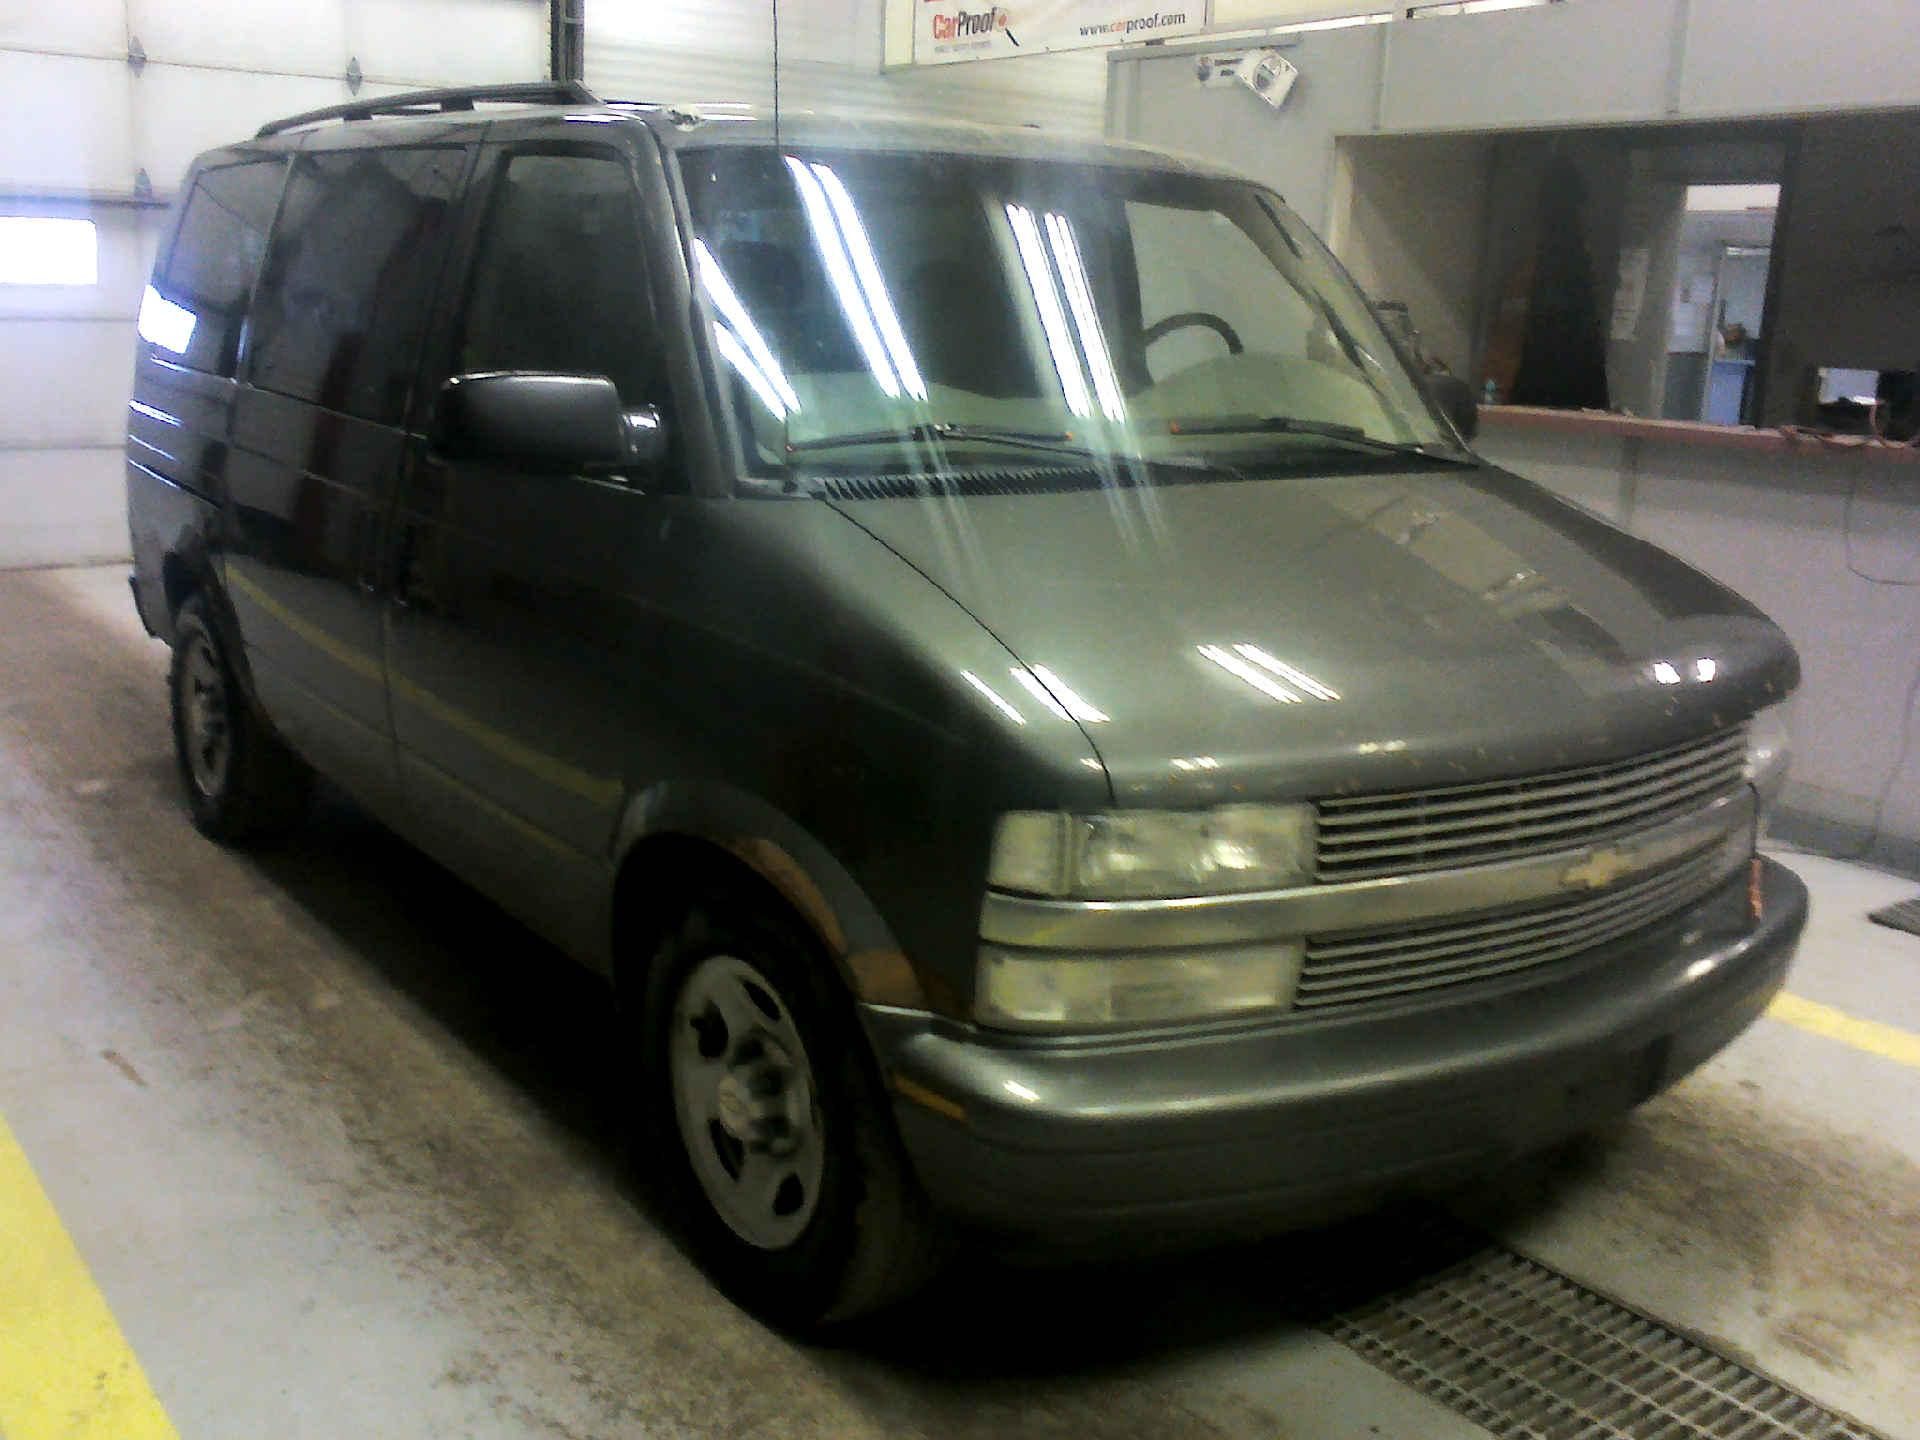 2003 CHEVROLET ASTRO N/A 4.3L V6 OHV 12V AUTOMATIC SN:1GNEL19X83B123550 OPTIONS:AC TW CC PW PDL CD - Image 3 of 9